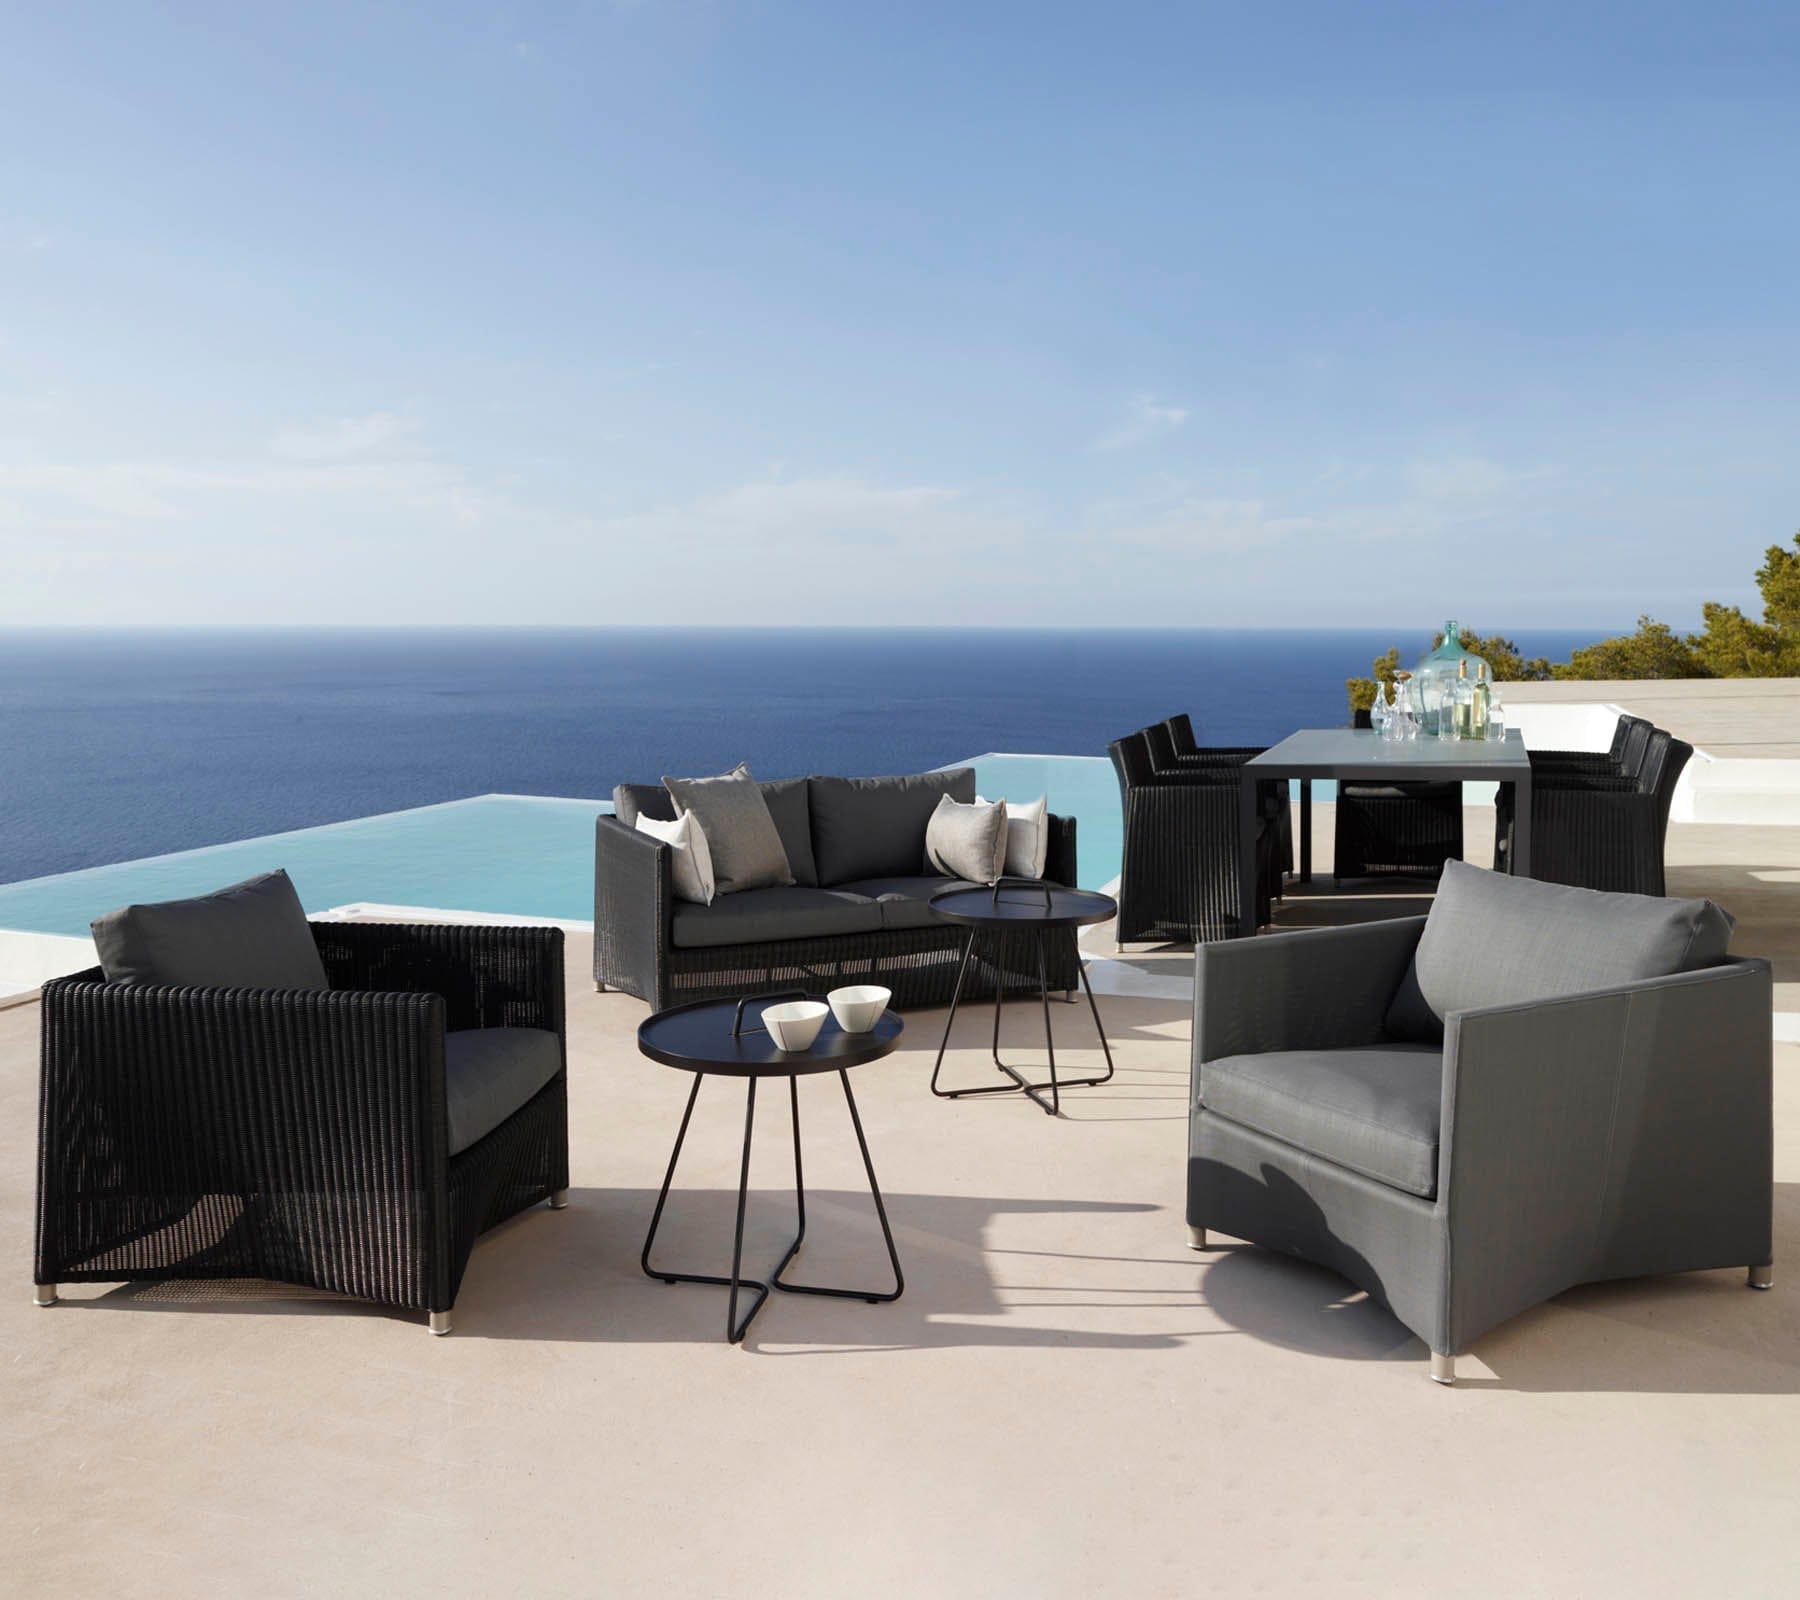 Boxhill's Diamond Weave Lounge Chair lifestyle image together with other Diamond Sofa collection beside the pool